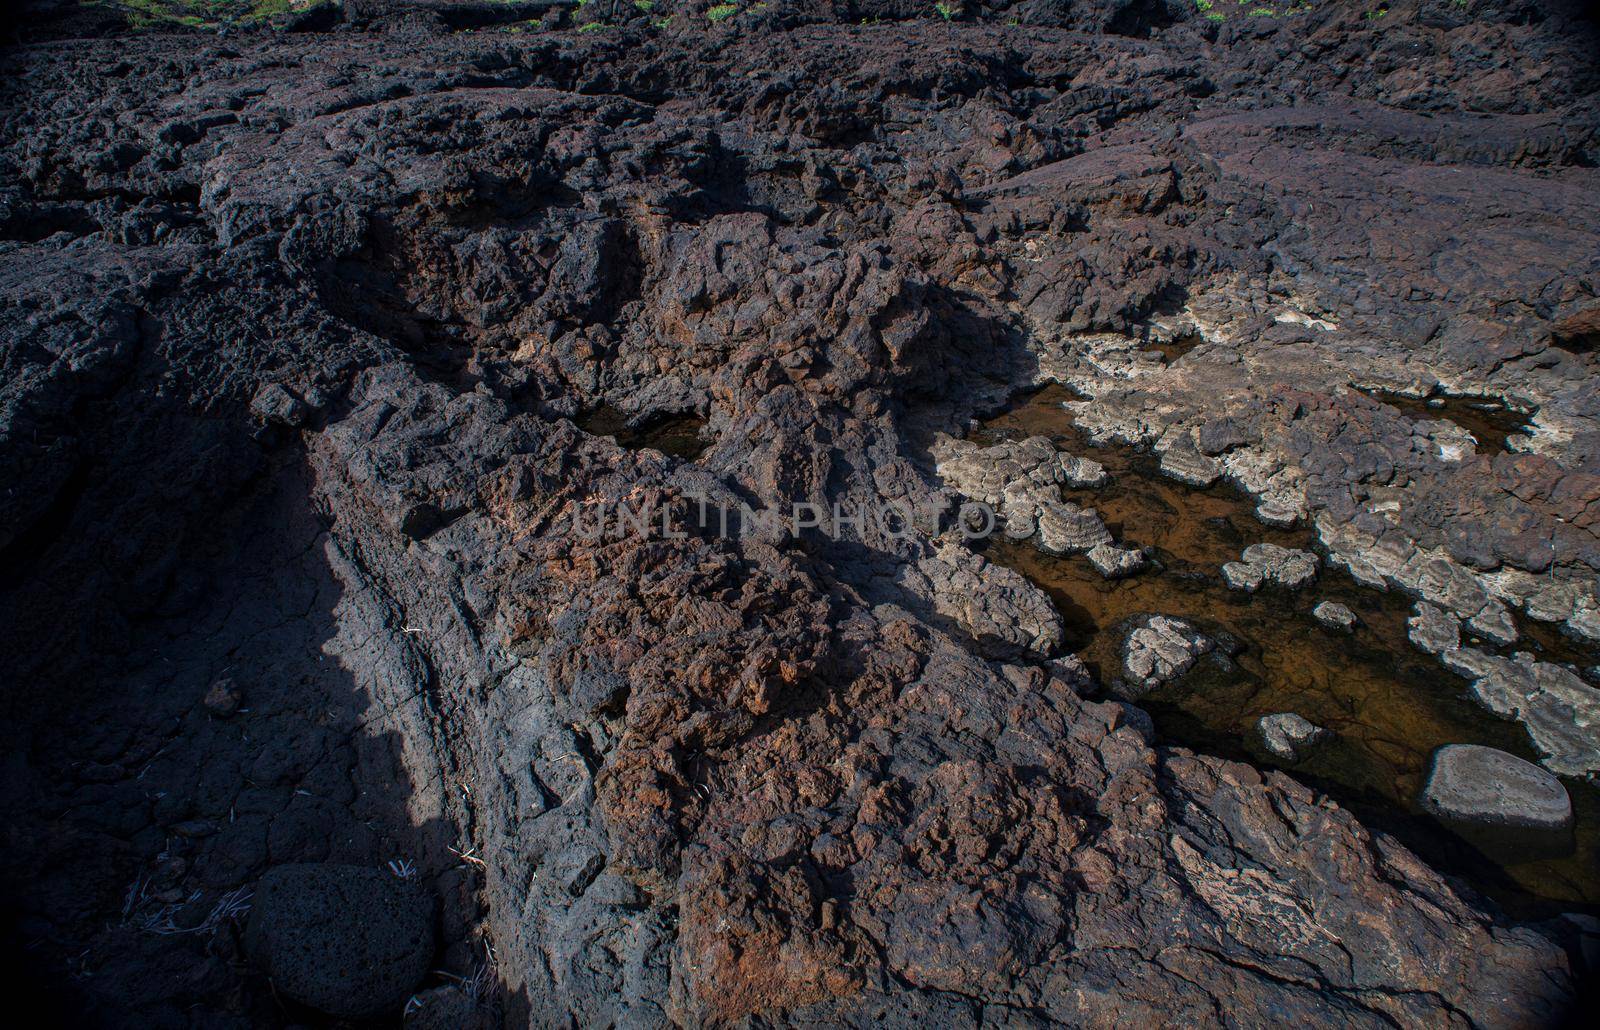 View of the lava rock, Linosa by bepsimage